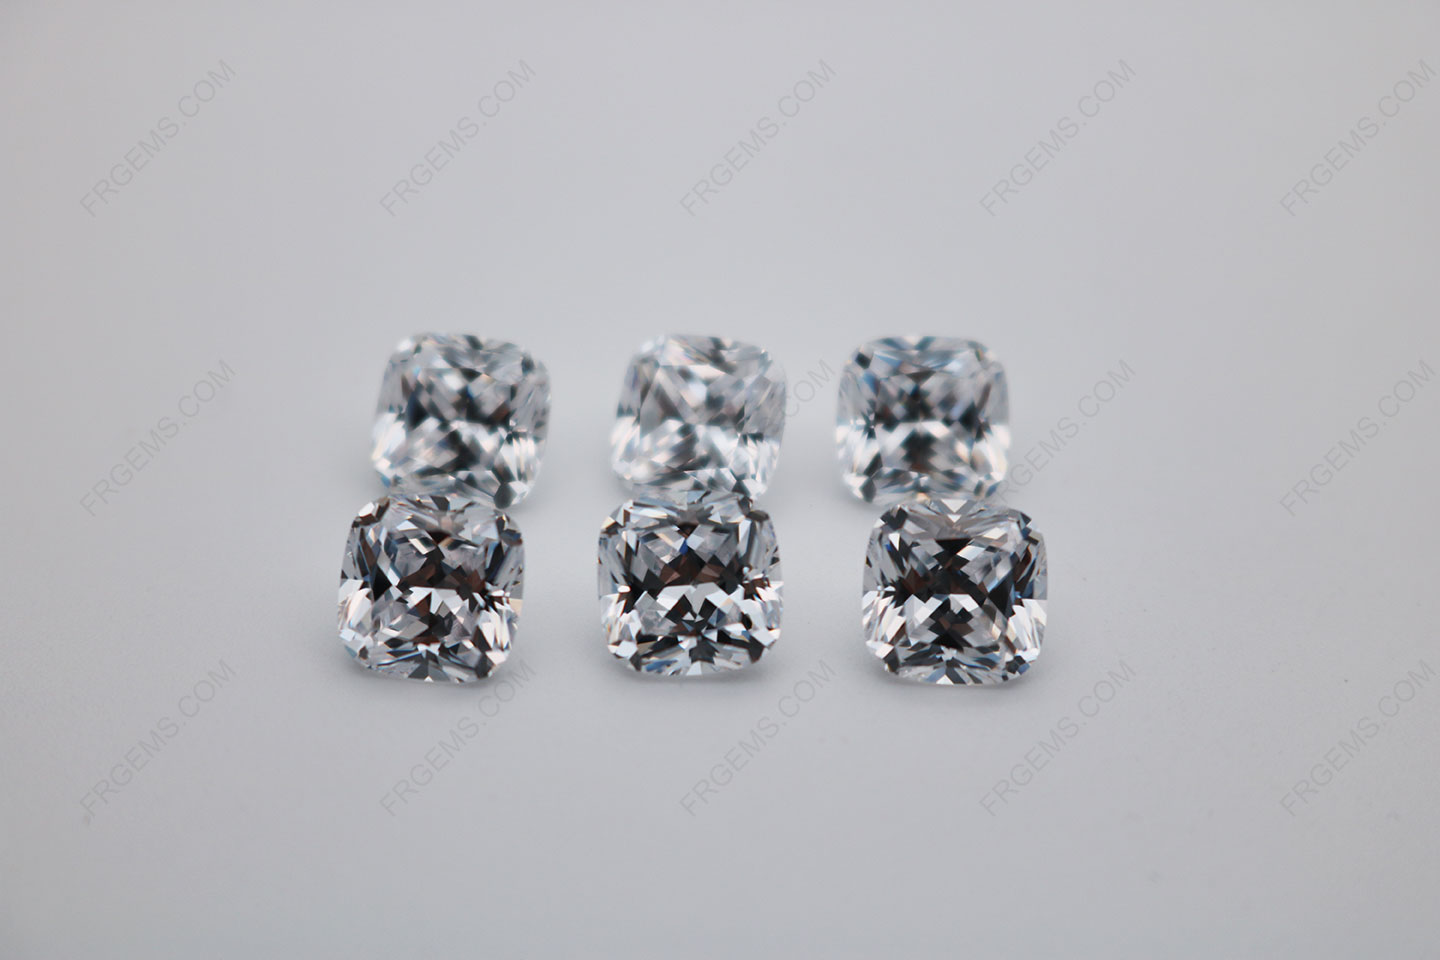 Cubic_Zirconia_White_Color_5A_Best_Quality_Cushion_Shape_Faceted_Cut_7x7mm_stones_IMG_0669